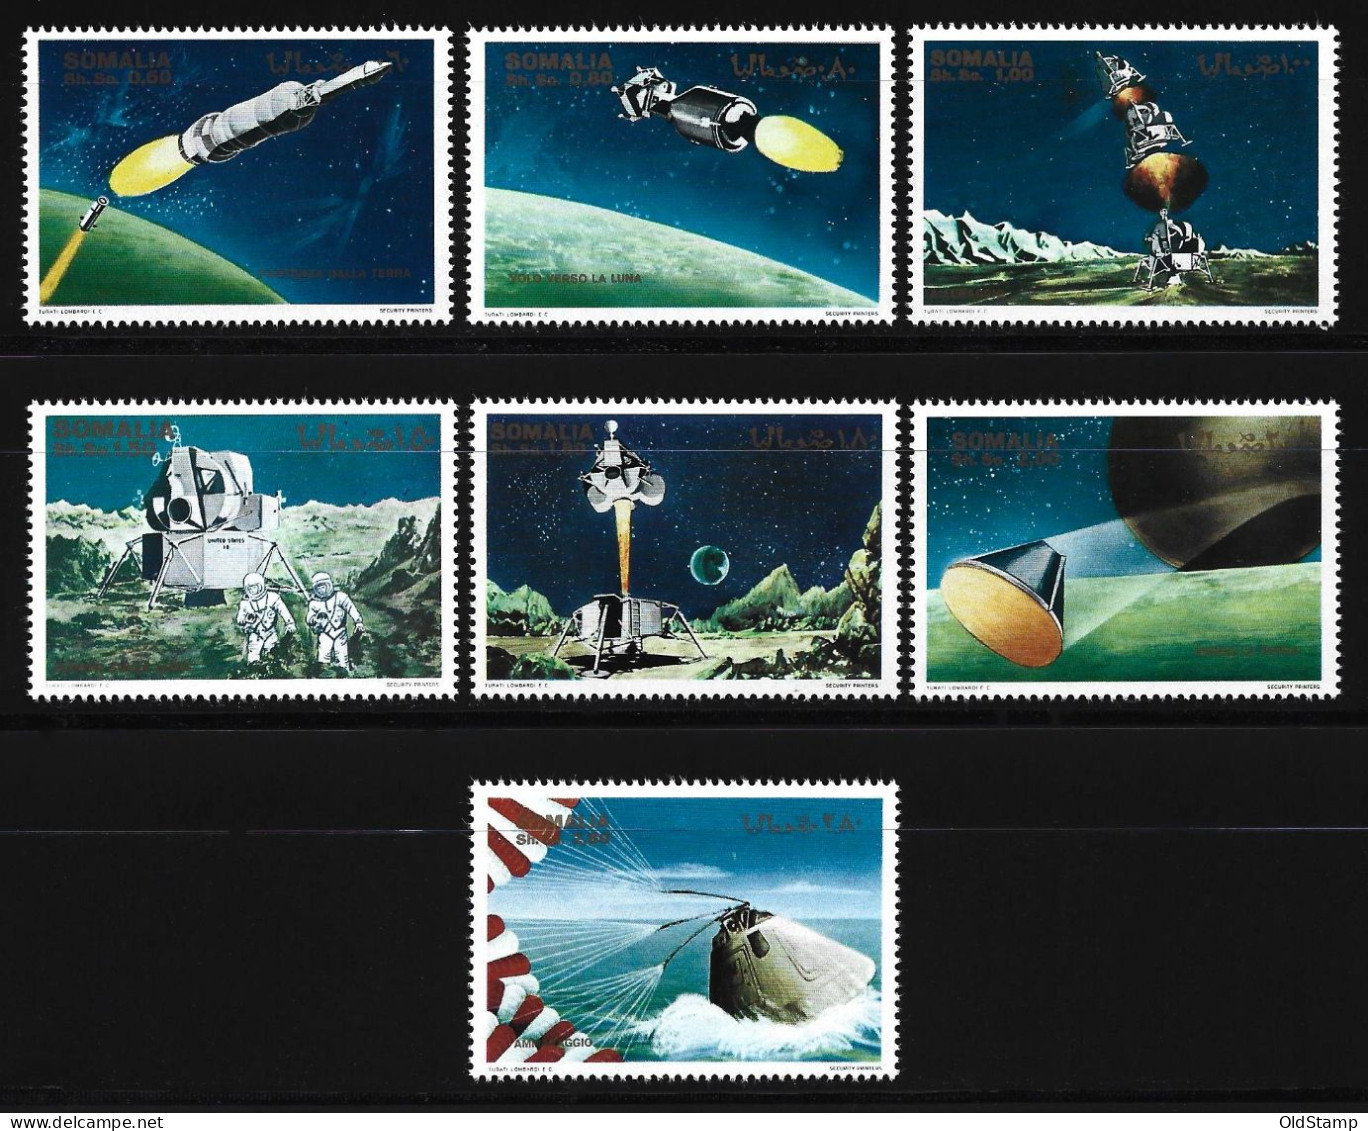 Somalia SPACE SPACESHIP PLANET ASTRONAUT STAR MNH LUXE Africa Stamps FULL SET - Collections